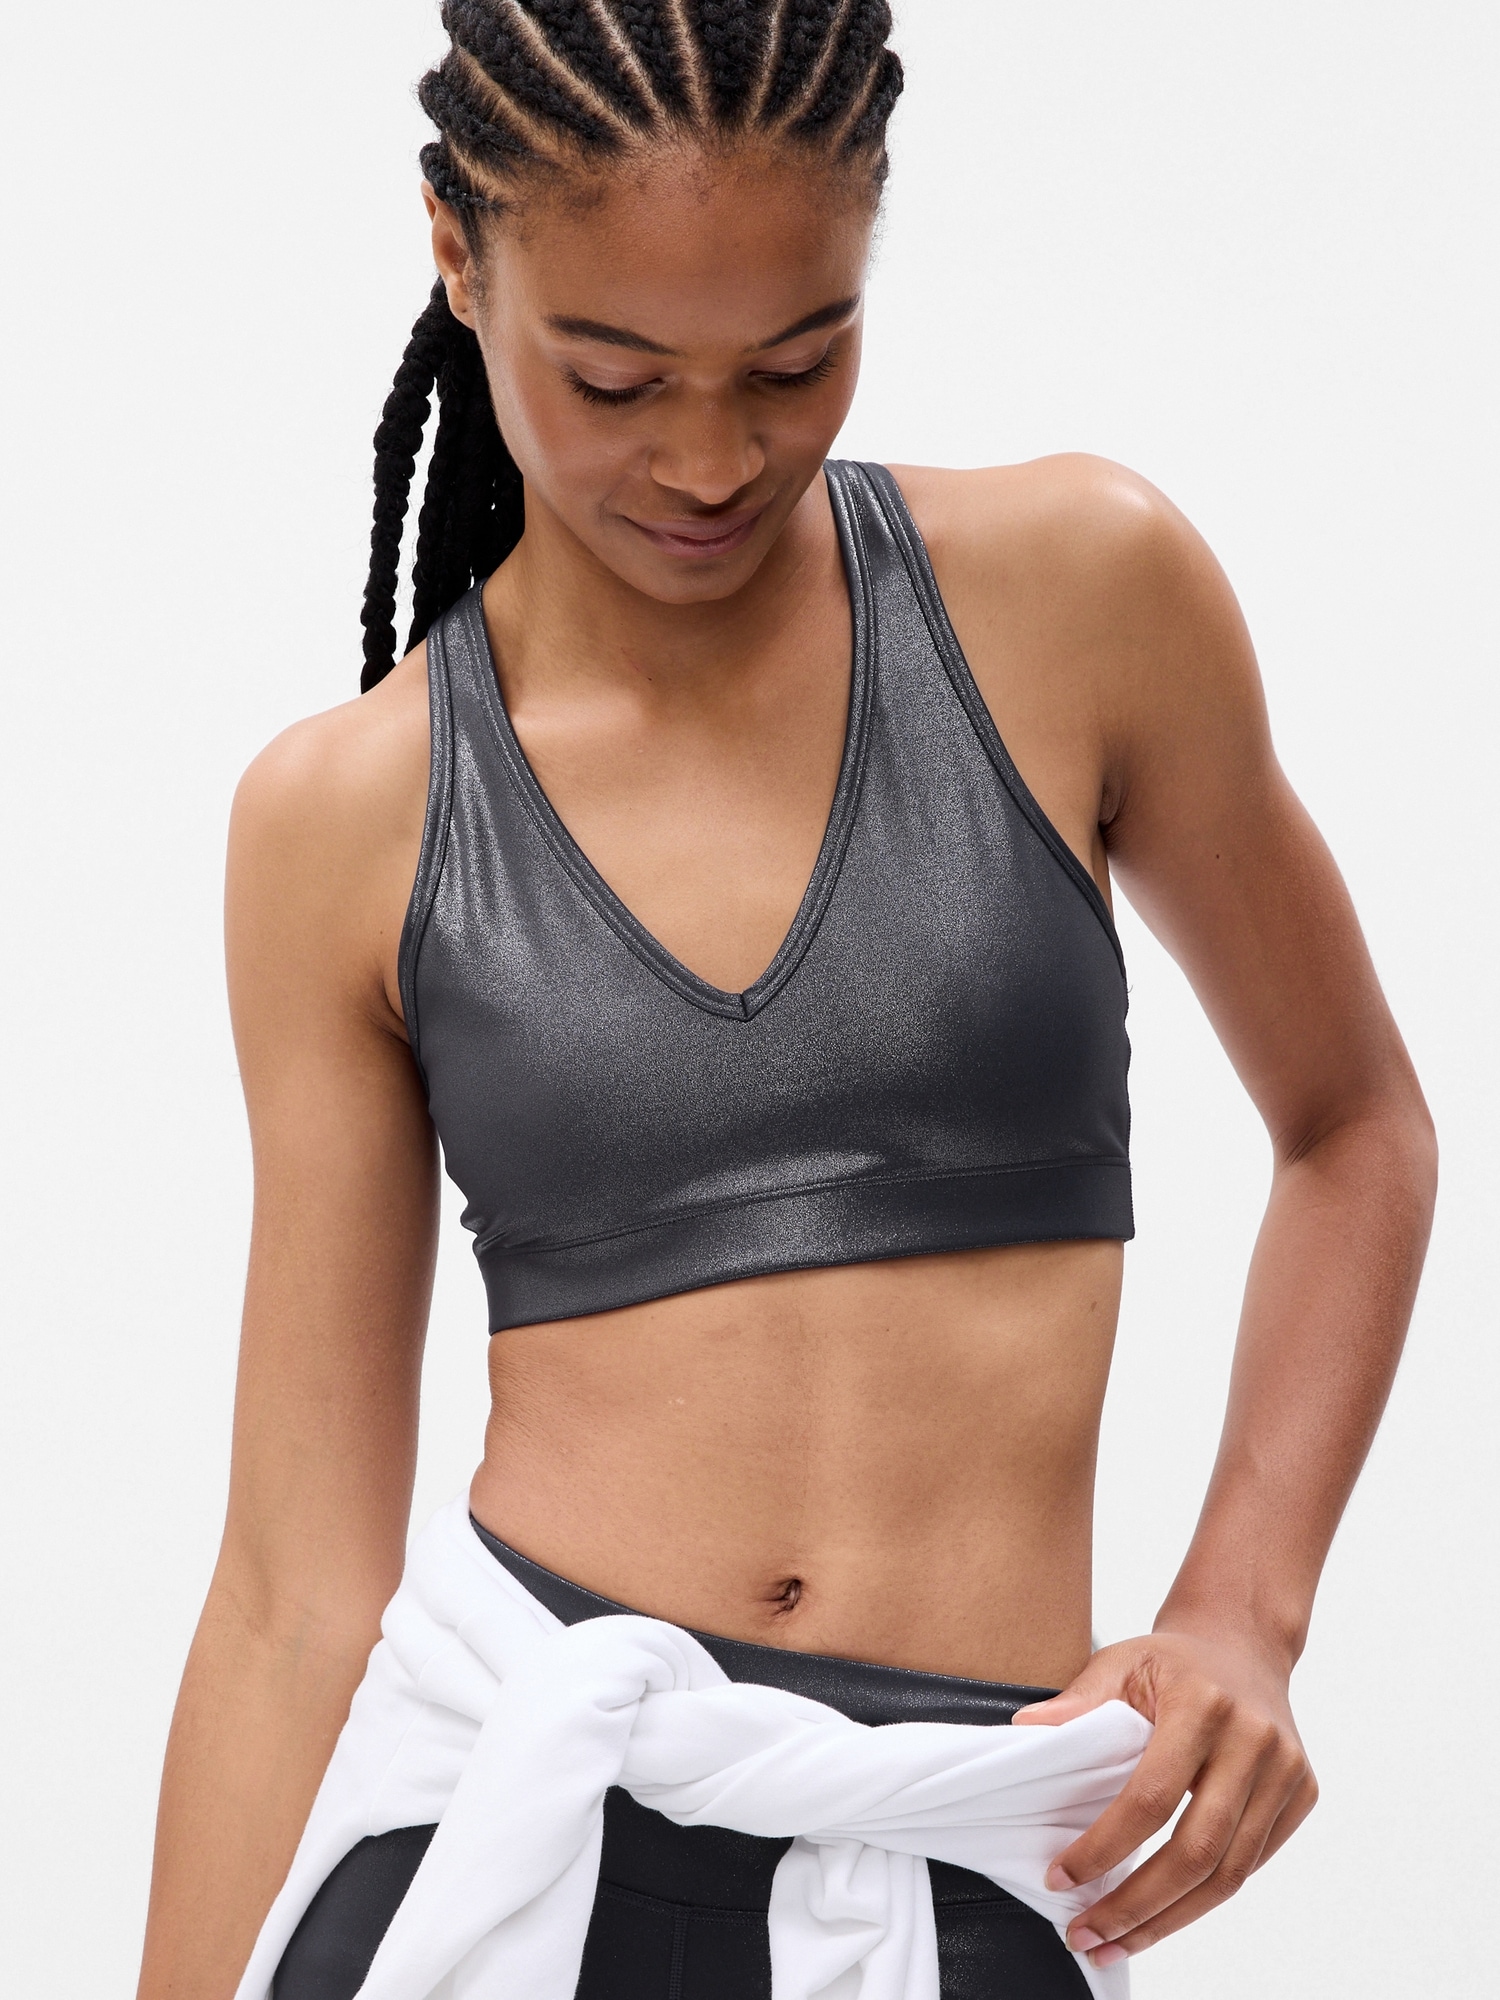 Gap GapFit Sculpt Medium Impact Zip Front Sports Bra, We Compared 10 Gap  Sports Bras With Varying Levels of Support (and They're on Sale)